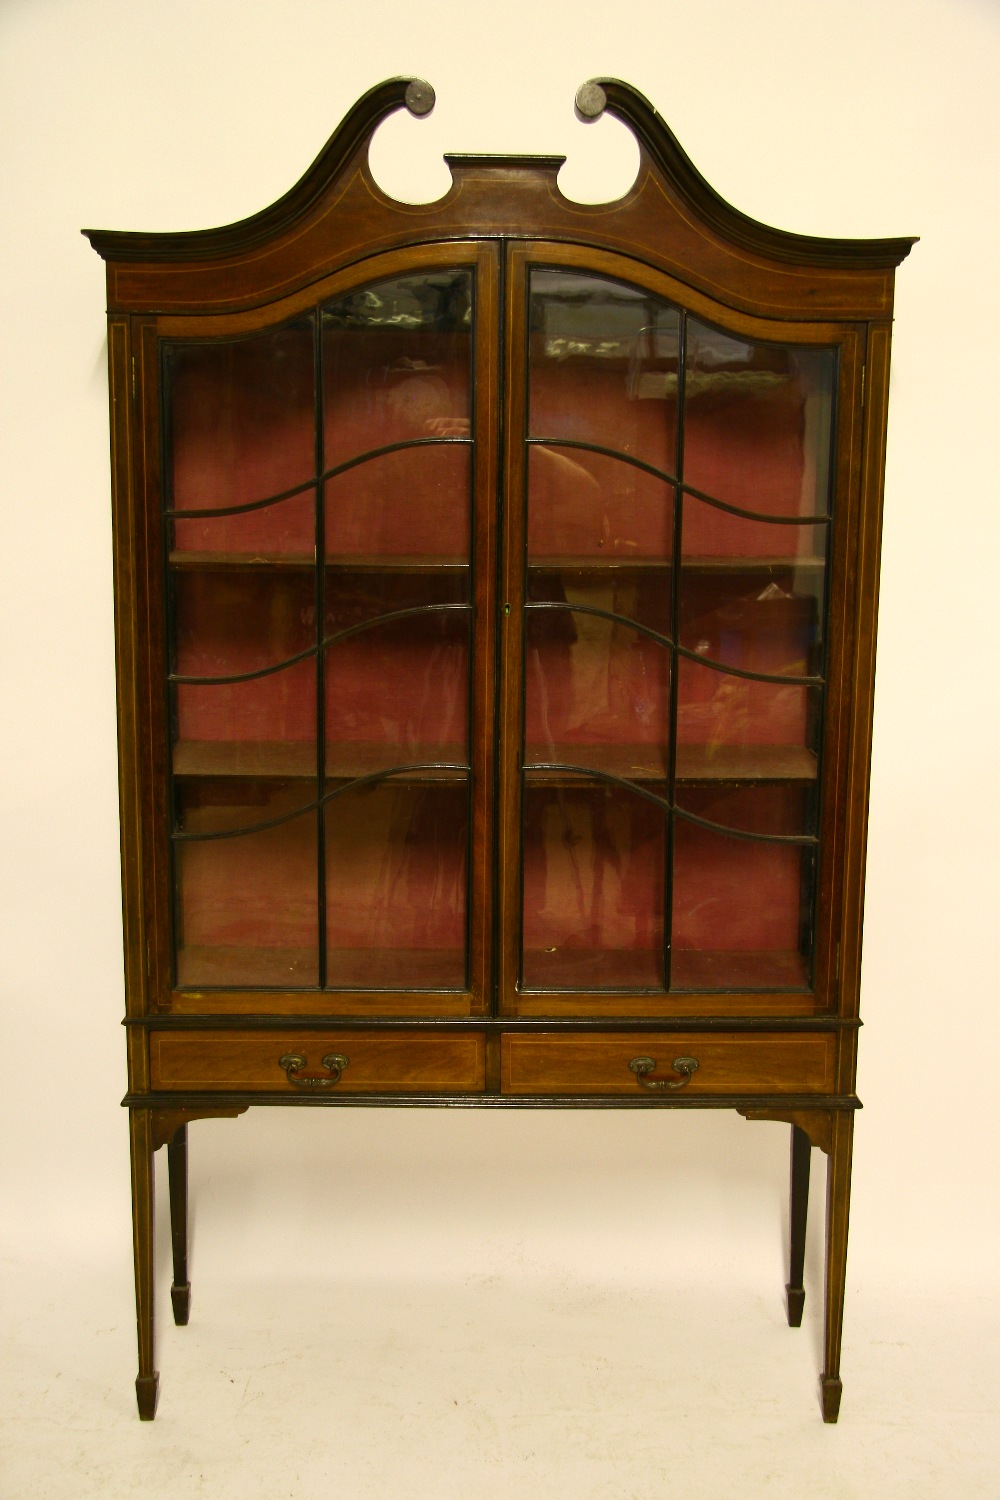 An Edwardian inlaid mahogany display cabinet with swan-neck cornice, enclosed pair of glazed